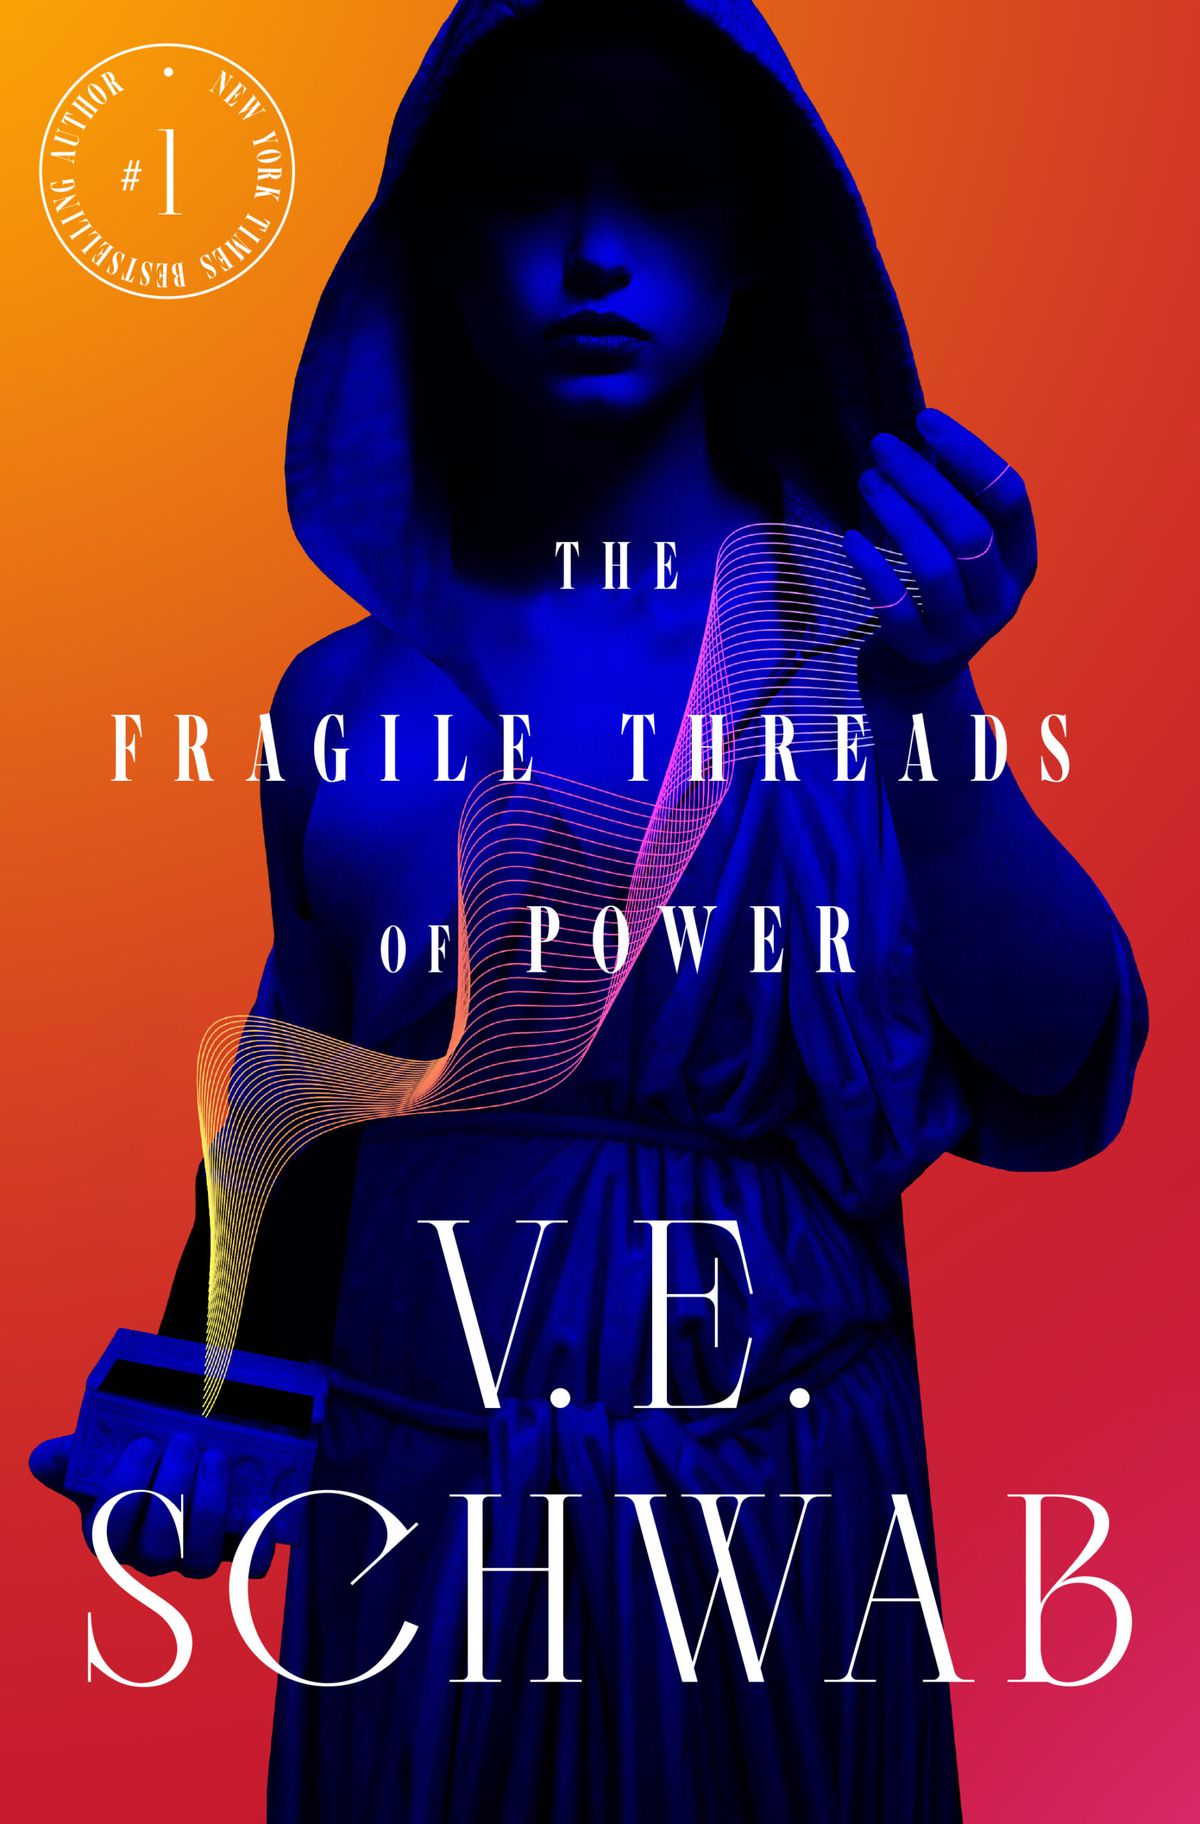 Cover image of V.E. Schwab’s The Fragile Threads of Power, with a figure in a cloak, tinted with blue lighting, pulling strange mesh threads from a box.